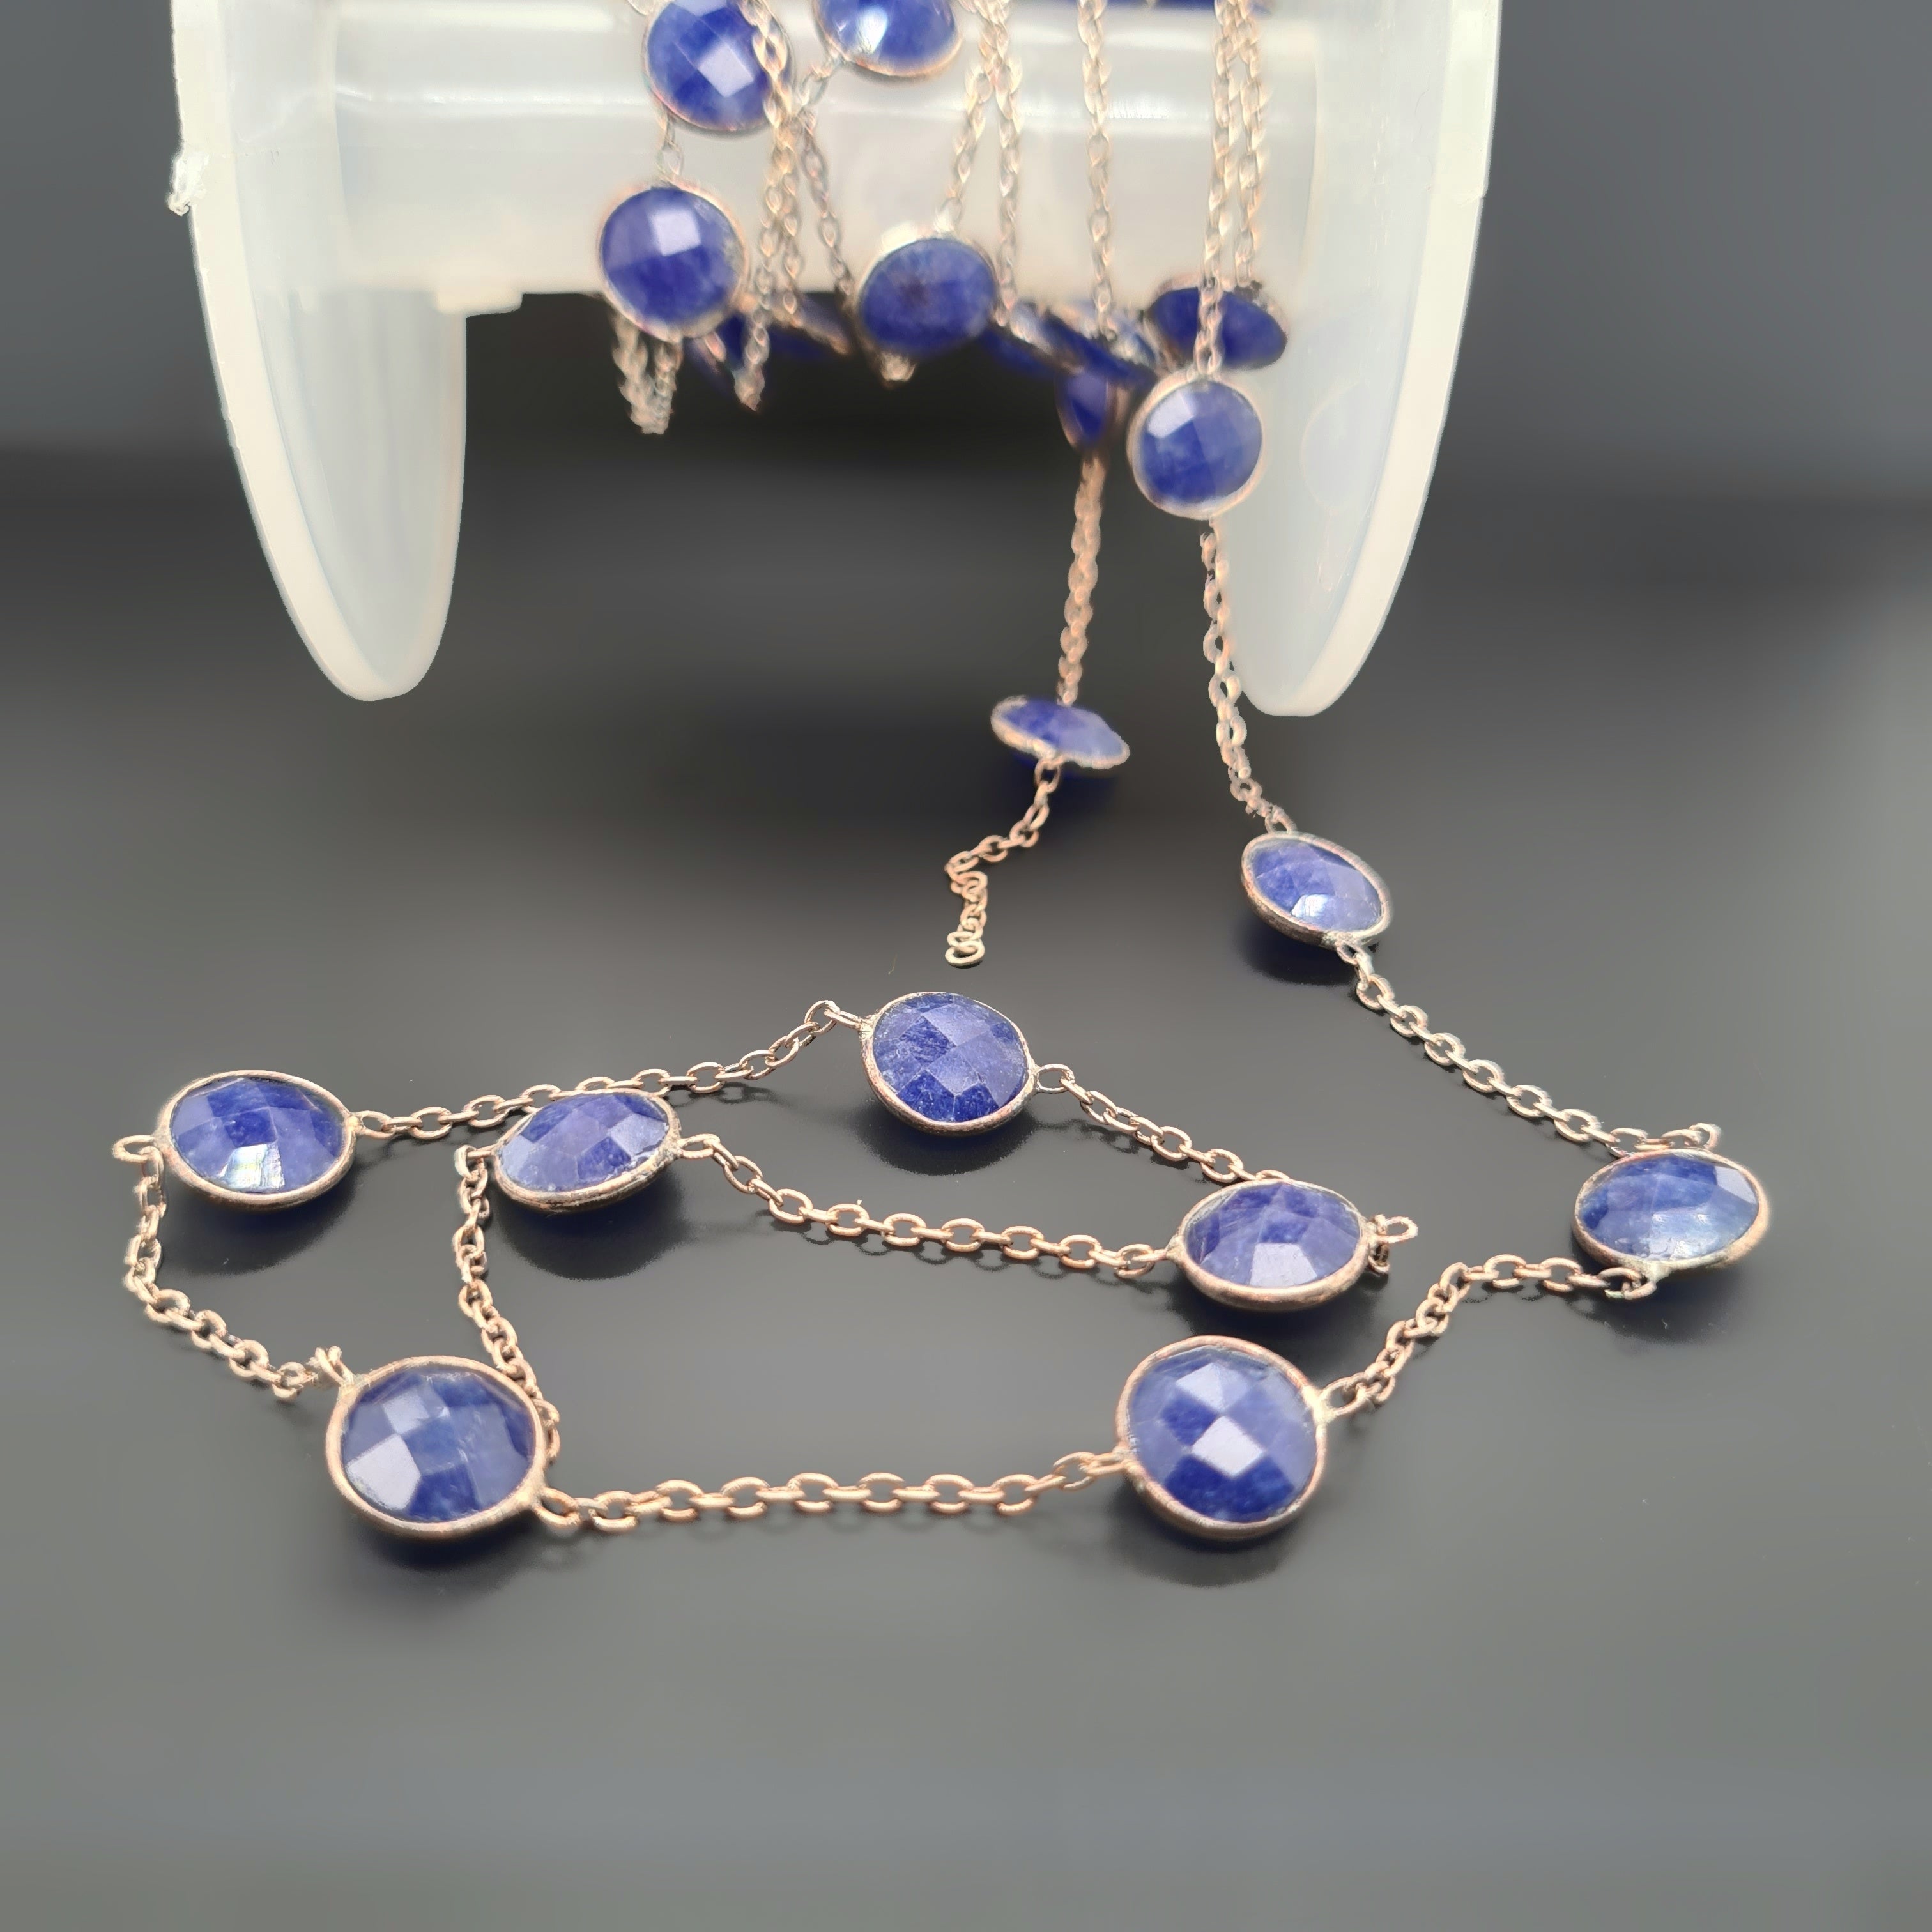 Natural Lapis Lazuli Chain on 925 Sterling Silver | 9mm | by Length - The LabradoriteKing